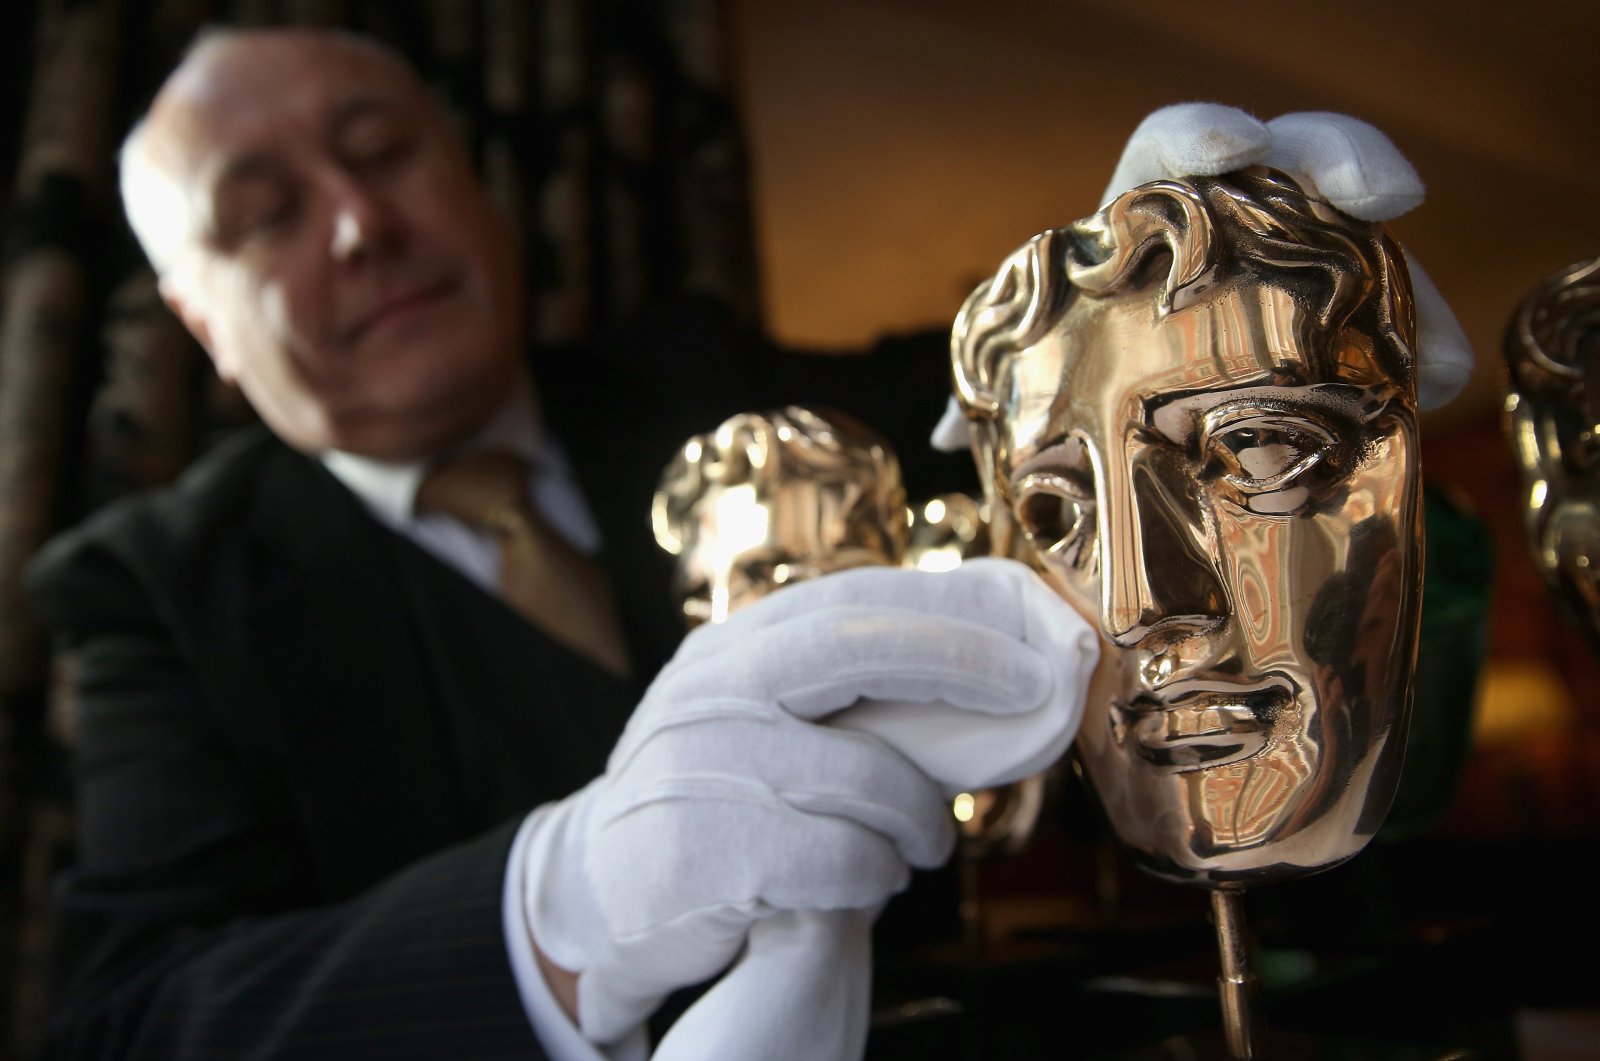 The iconic BAFTA mask awards are polished by a butler at the Savoy Hotel ahead of the British Academy of Film and Television Awards (BAFTA), in London, England, on Feb. 10, 2014. (Getty Images)